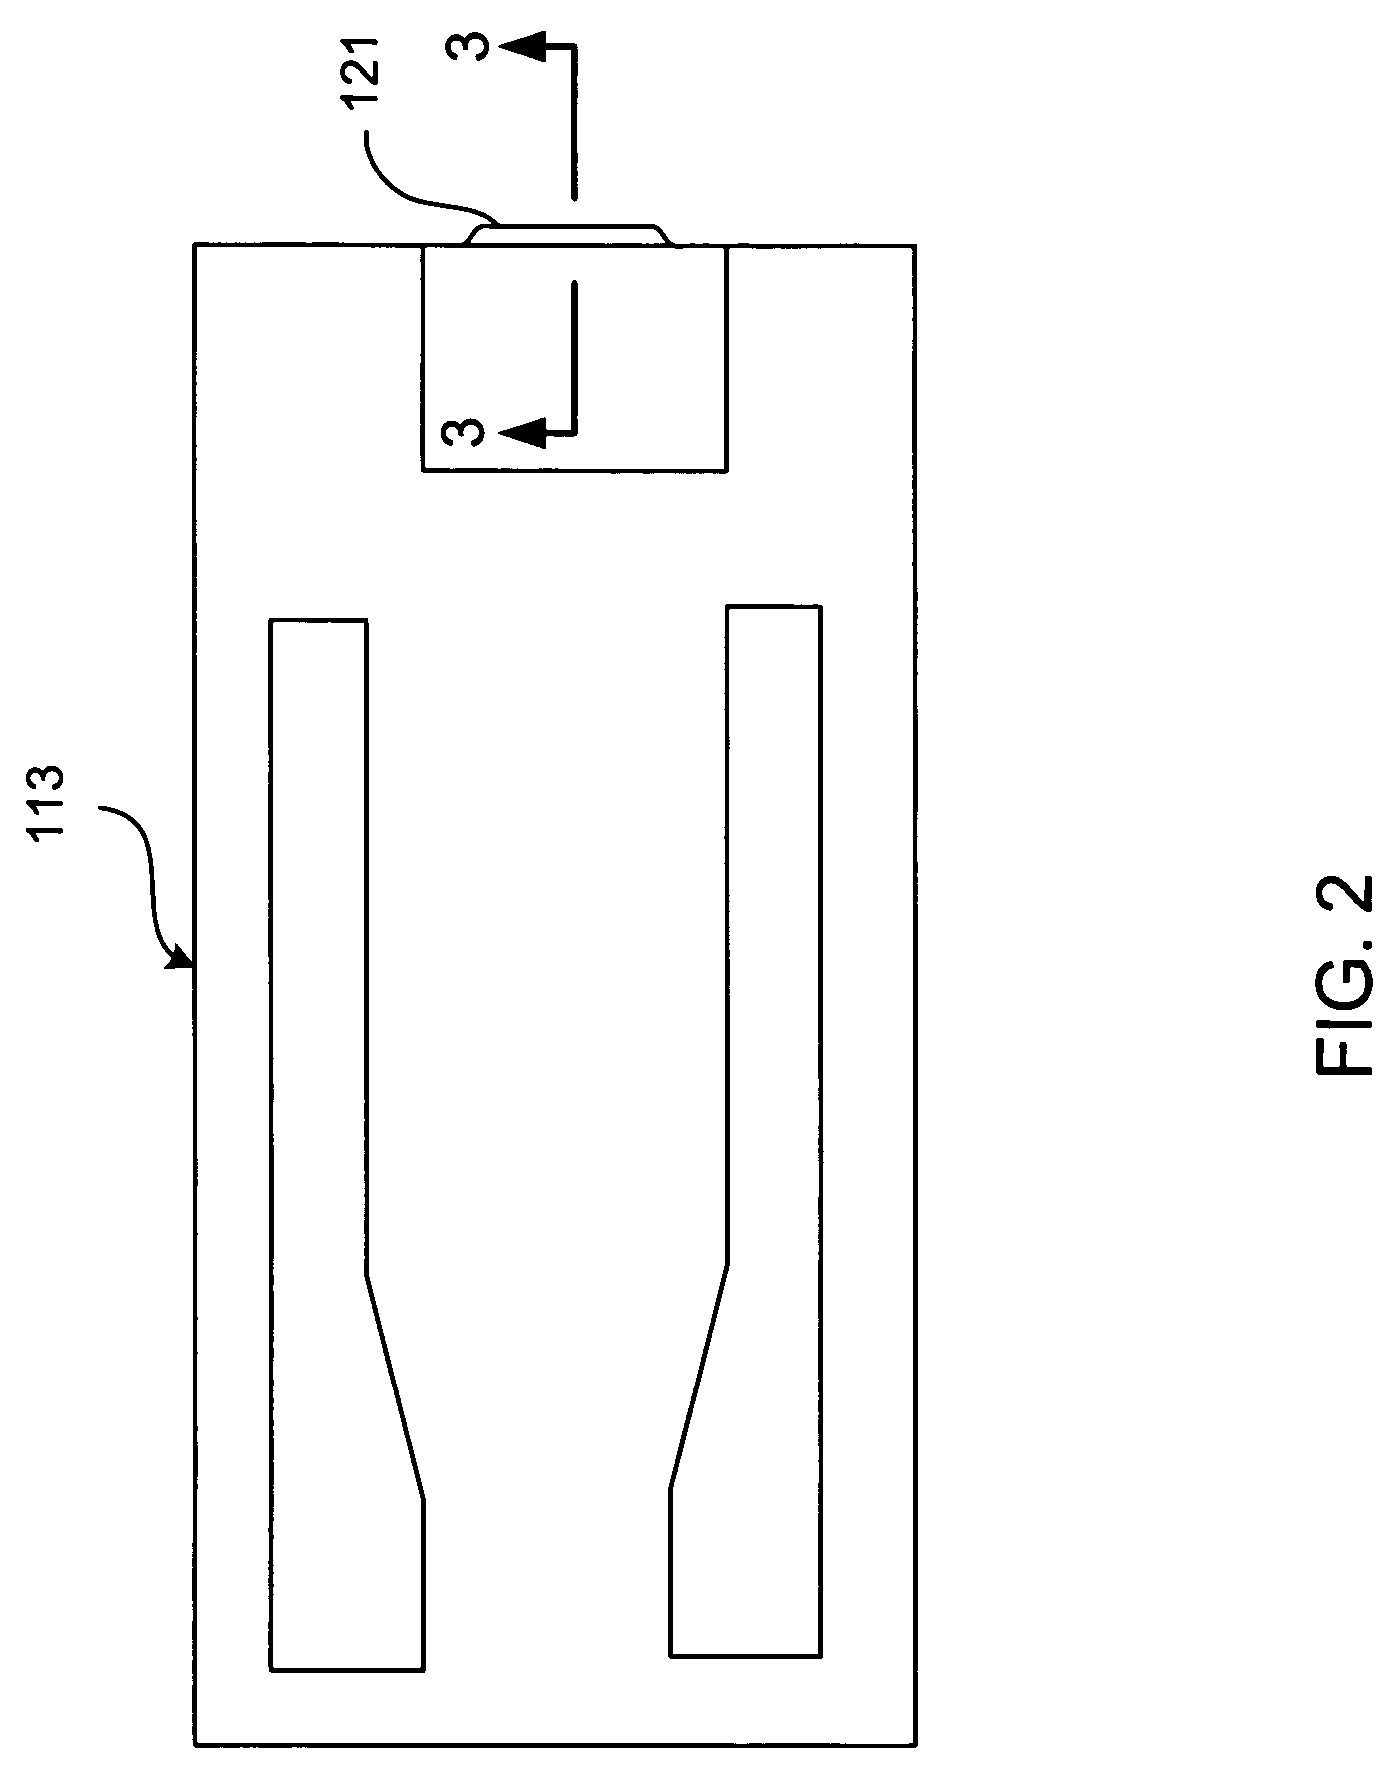 Flux shunt structure for reducing return pole corner fields in a perpendicular magnetic recording head